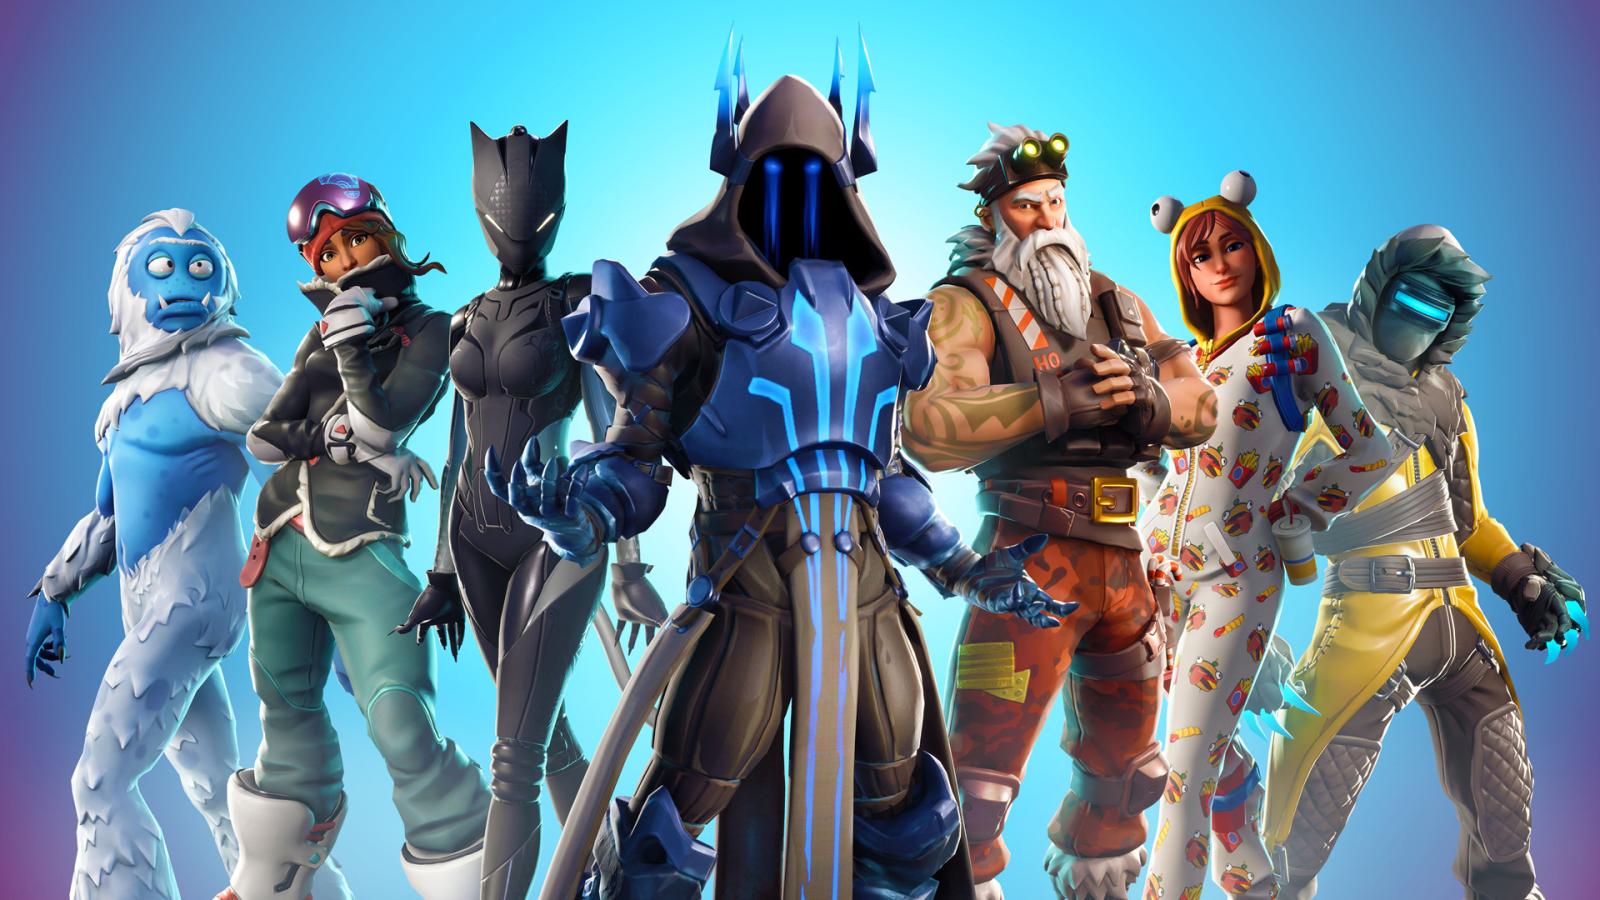 Fortnite: A social space like Facebook and skateparks once were